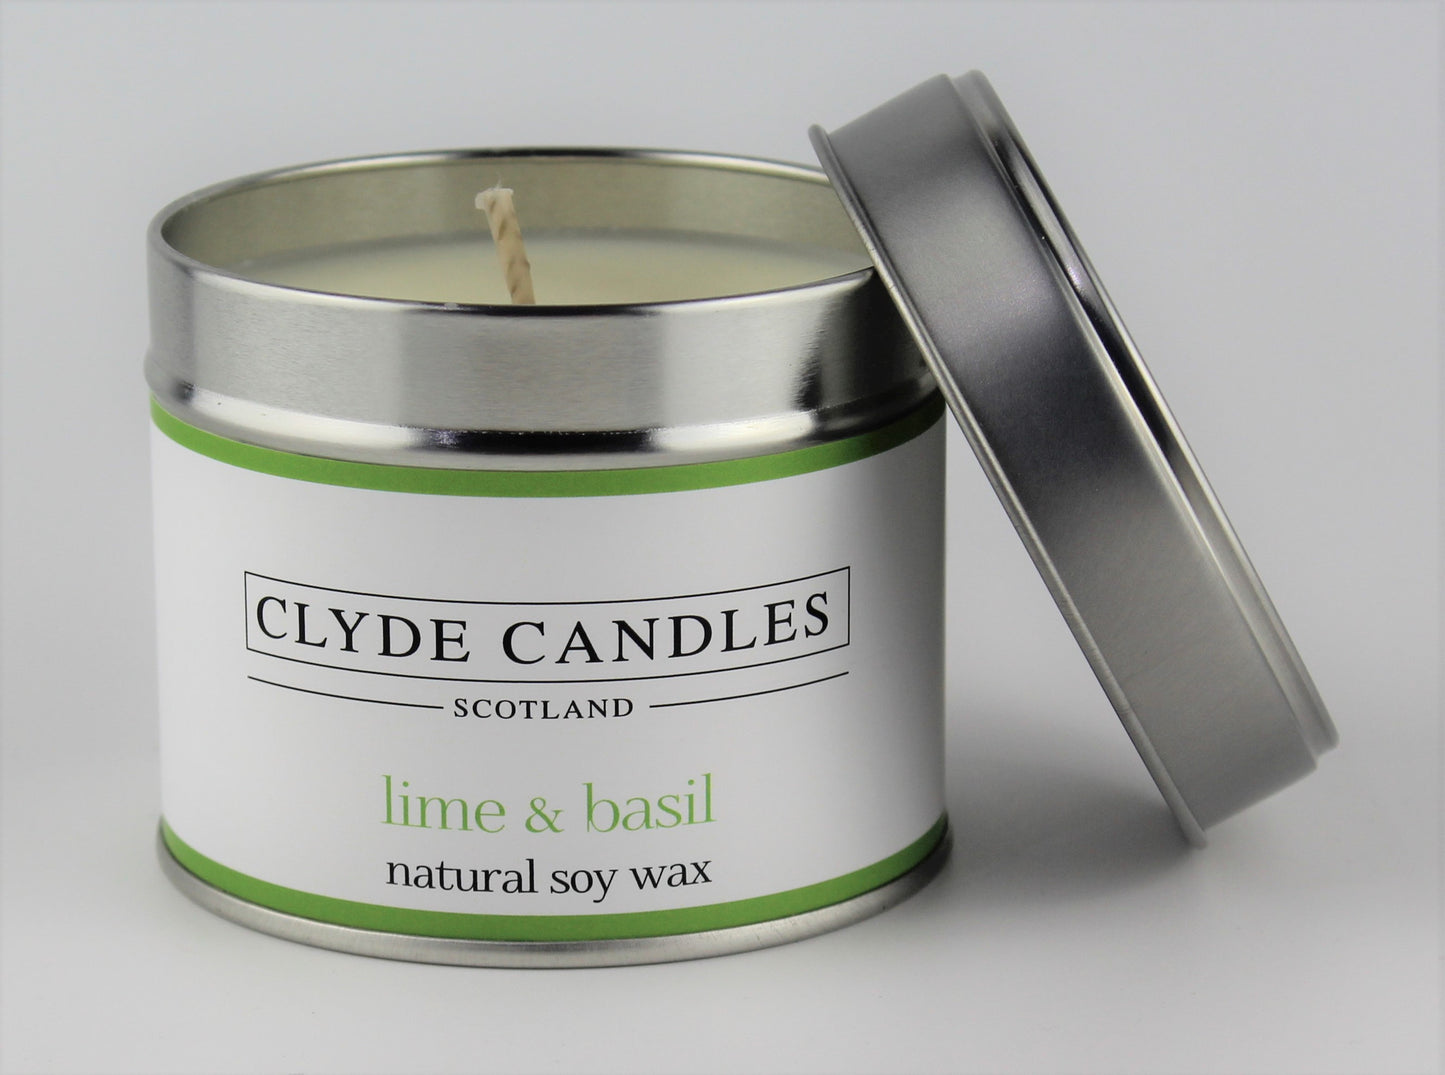 Lime & Basil Scented Candle Tin  Natural Soy wax, Scottish Candles, Clyde Candles